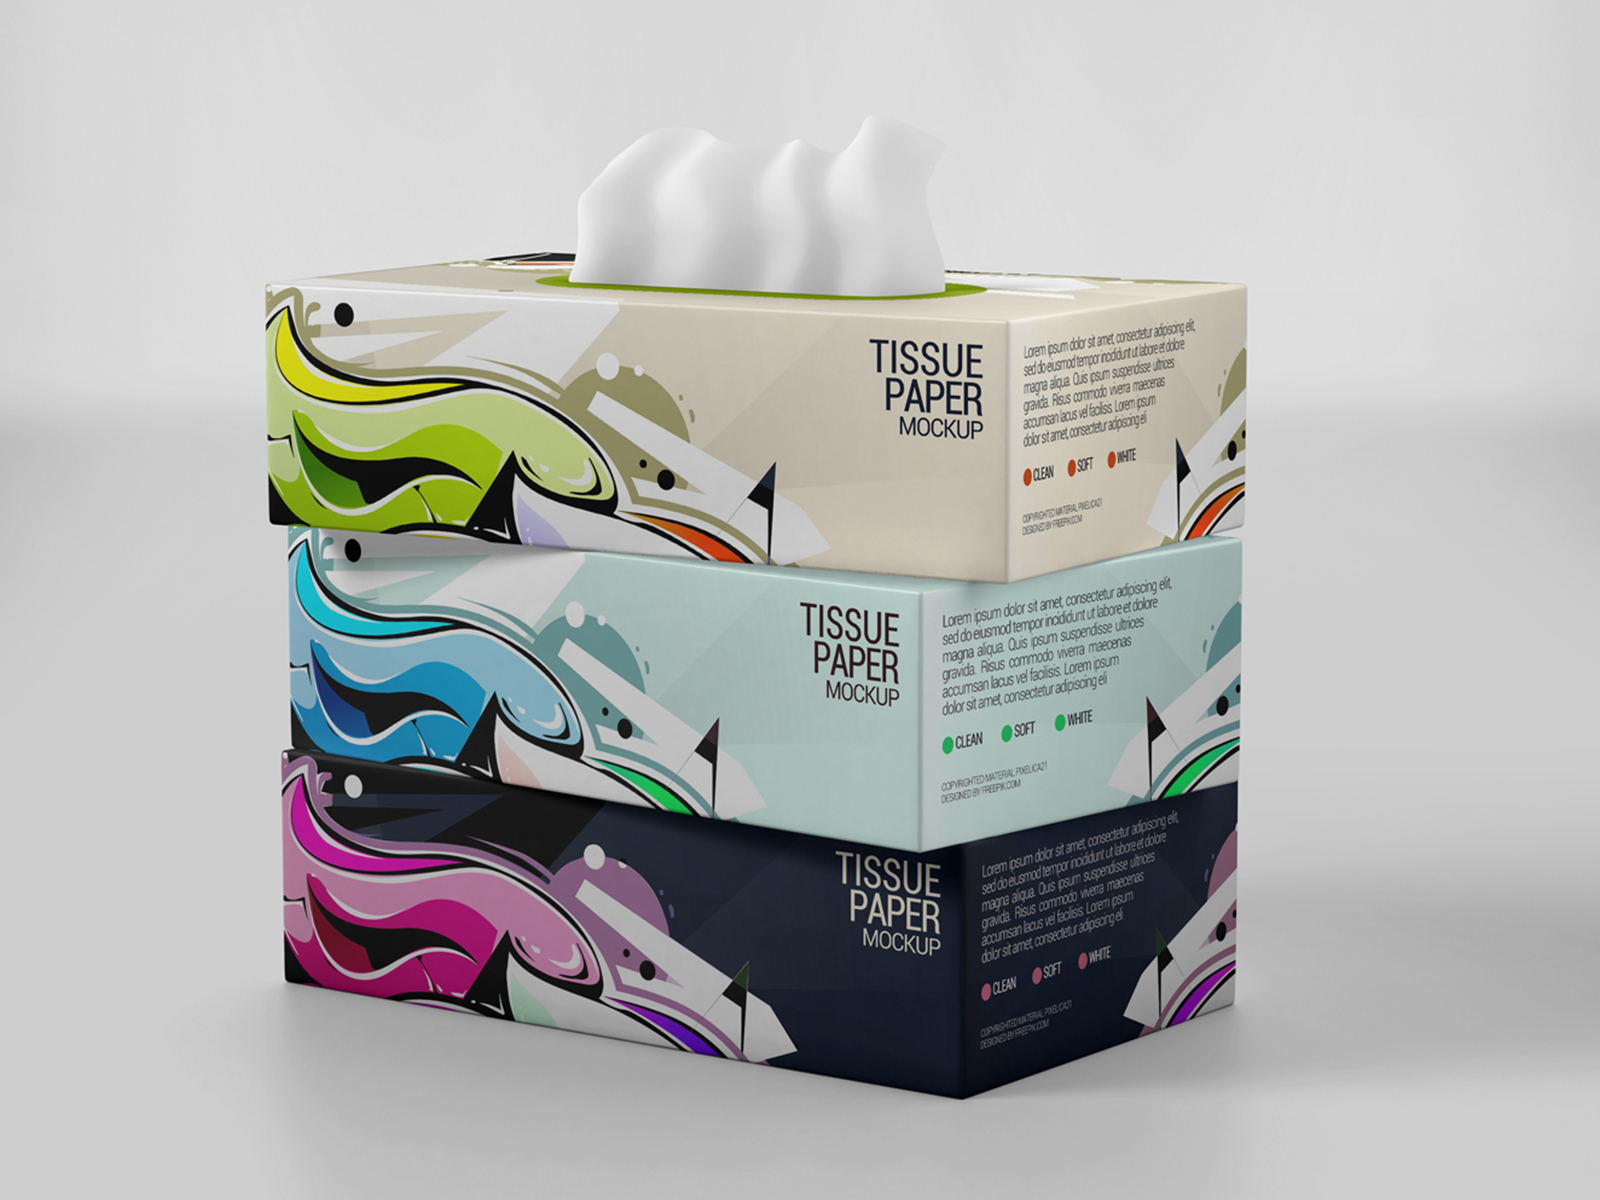 Download Tissue Box Mockup by Mostafa Absalan on Dribbble